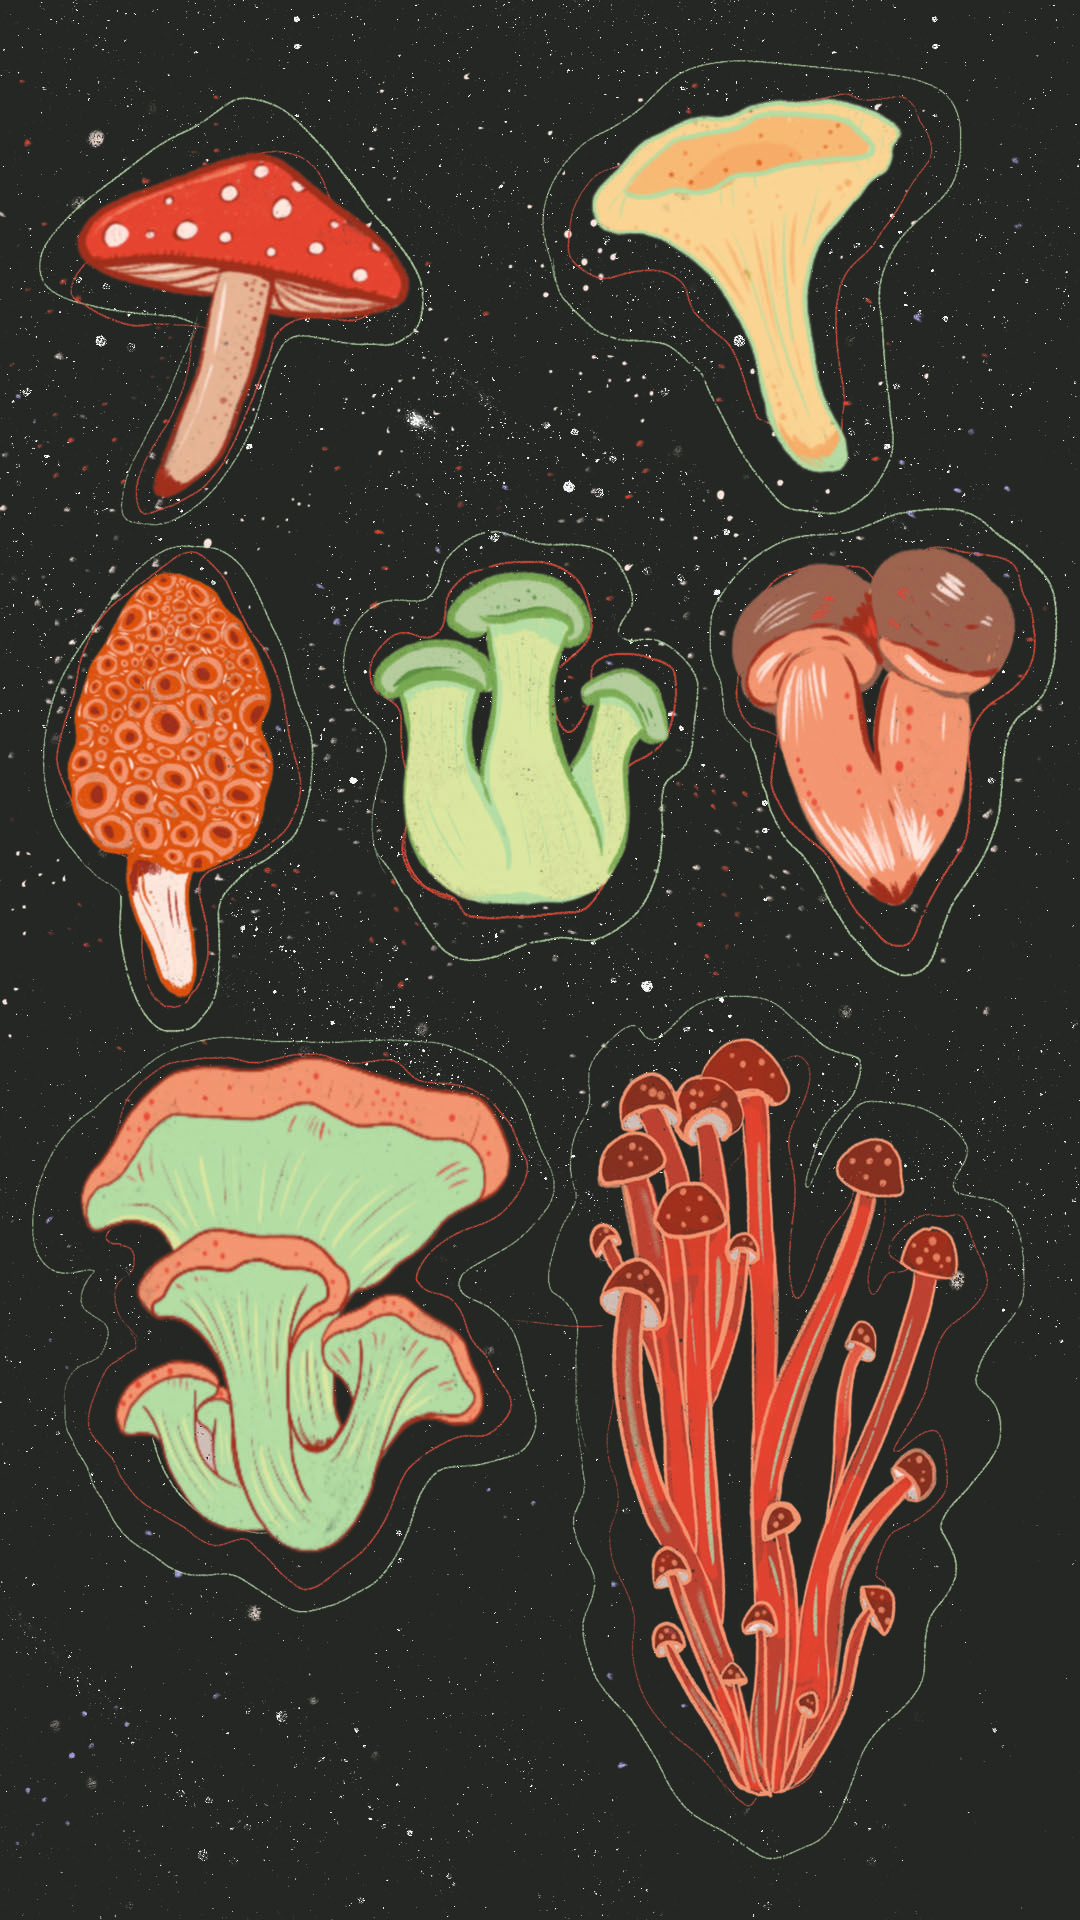 Phone Wall Paper Download Mushroom Forager. Mushroom Wallpaper, Hippie Wallpaper, Witchy Wallpaper